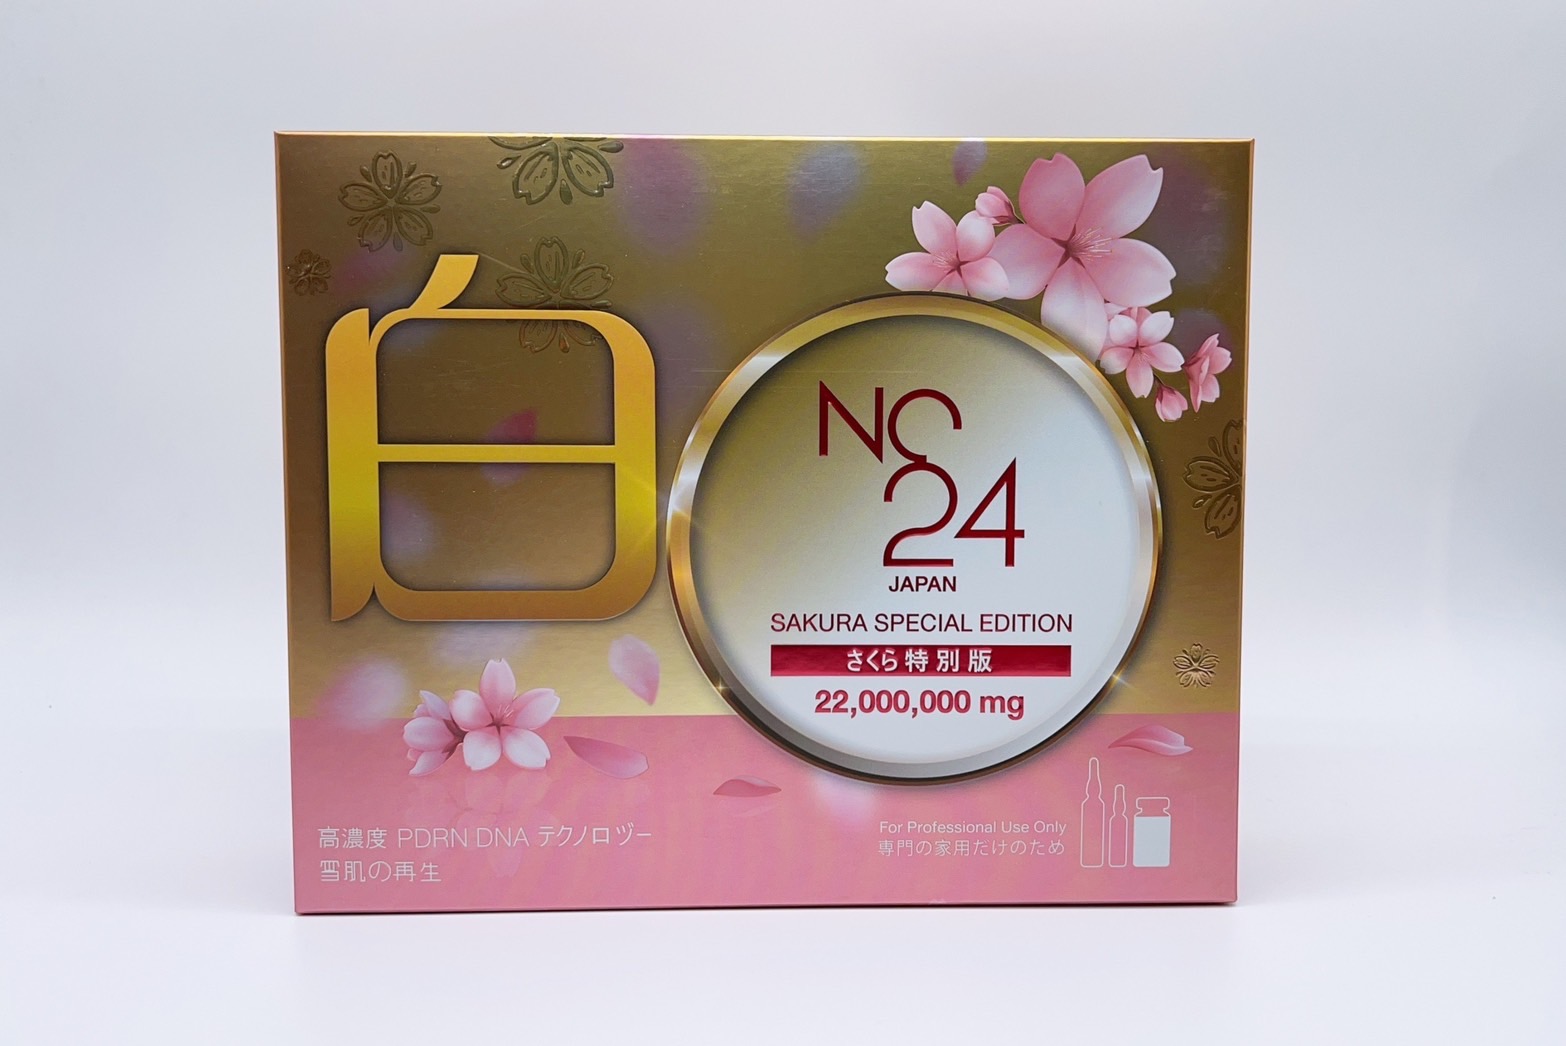 NC24 (JAPAN) SAKURA SPECIAL EDITION PDRN DNA 22,000,000 mg GLUTATHIONE WHITENING INJECTION by www.ccthaitown.com